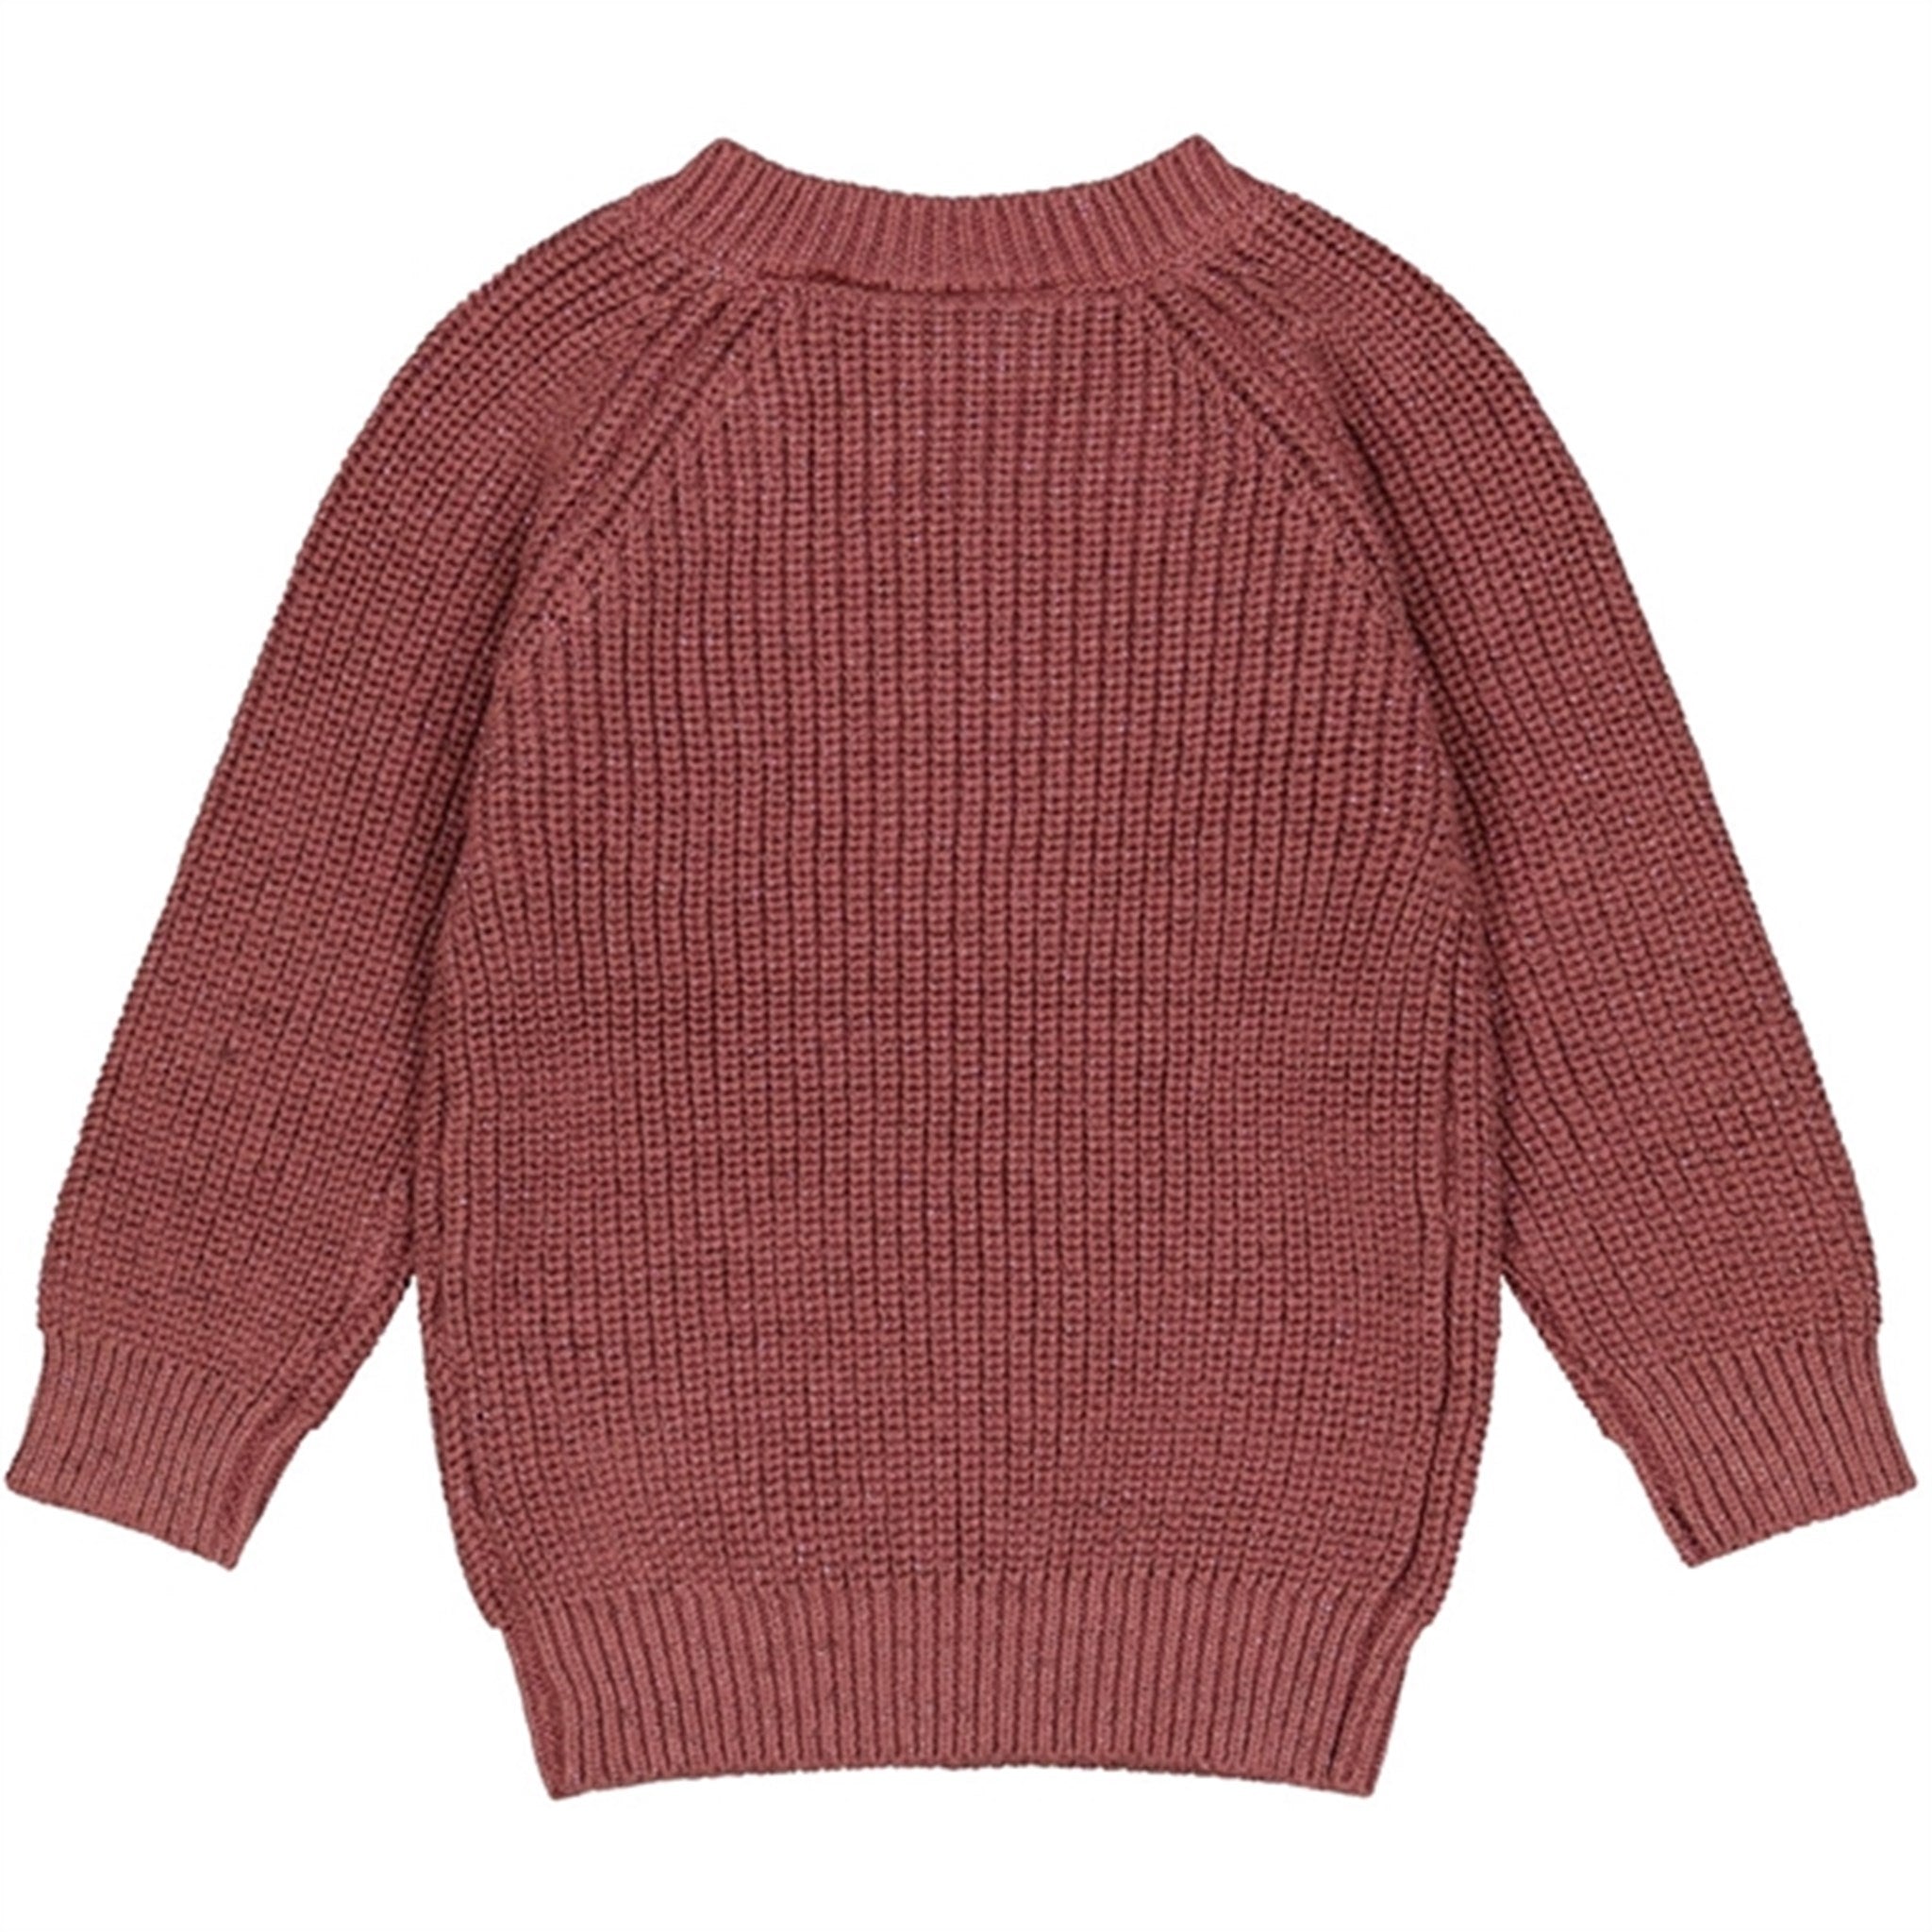 THE NEW Siblings Rose Brown Heather Glitter Pullover 2